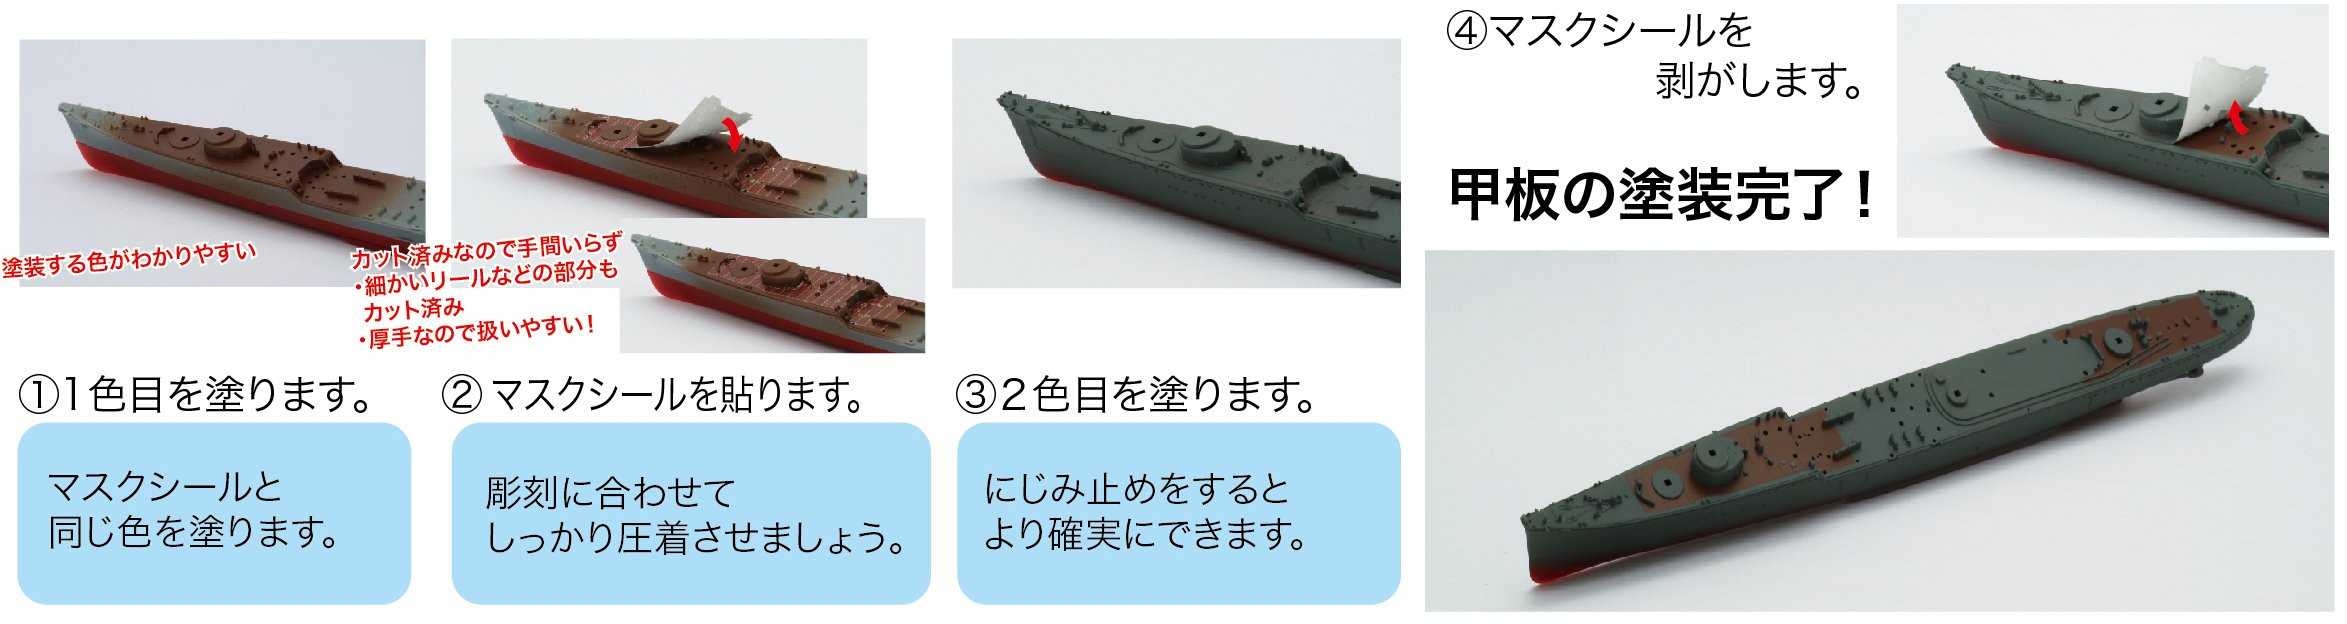 Fujimi Model 1/700 Special Series Spot No. 83 Japanese Navy High Speed Battleship Kongo October 1944 With Pre-Cut Mask Seal Plastic Model Special Sp83